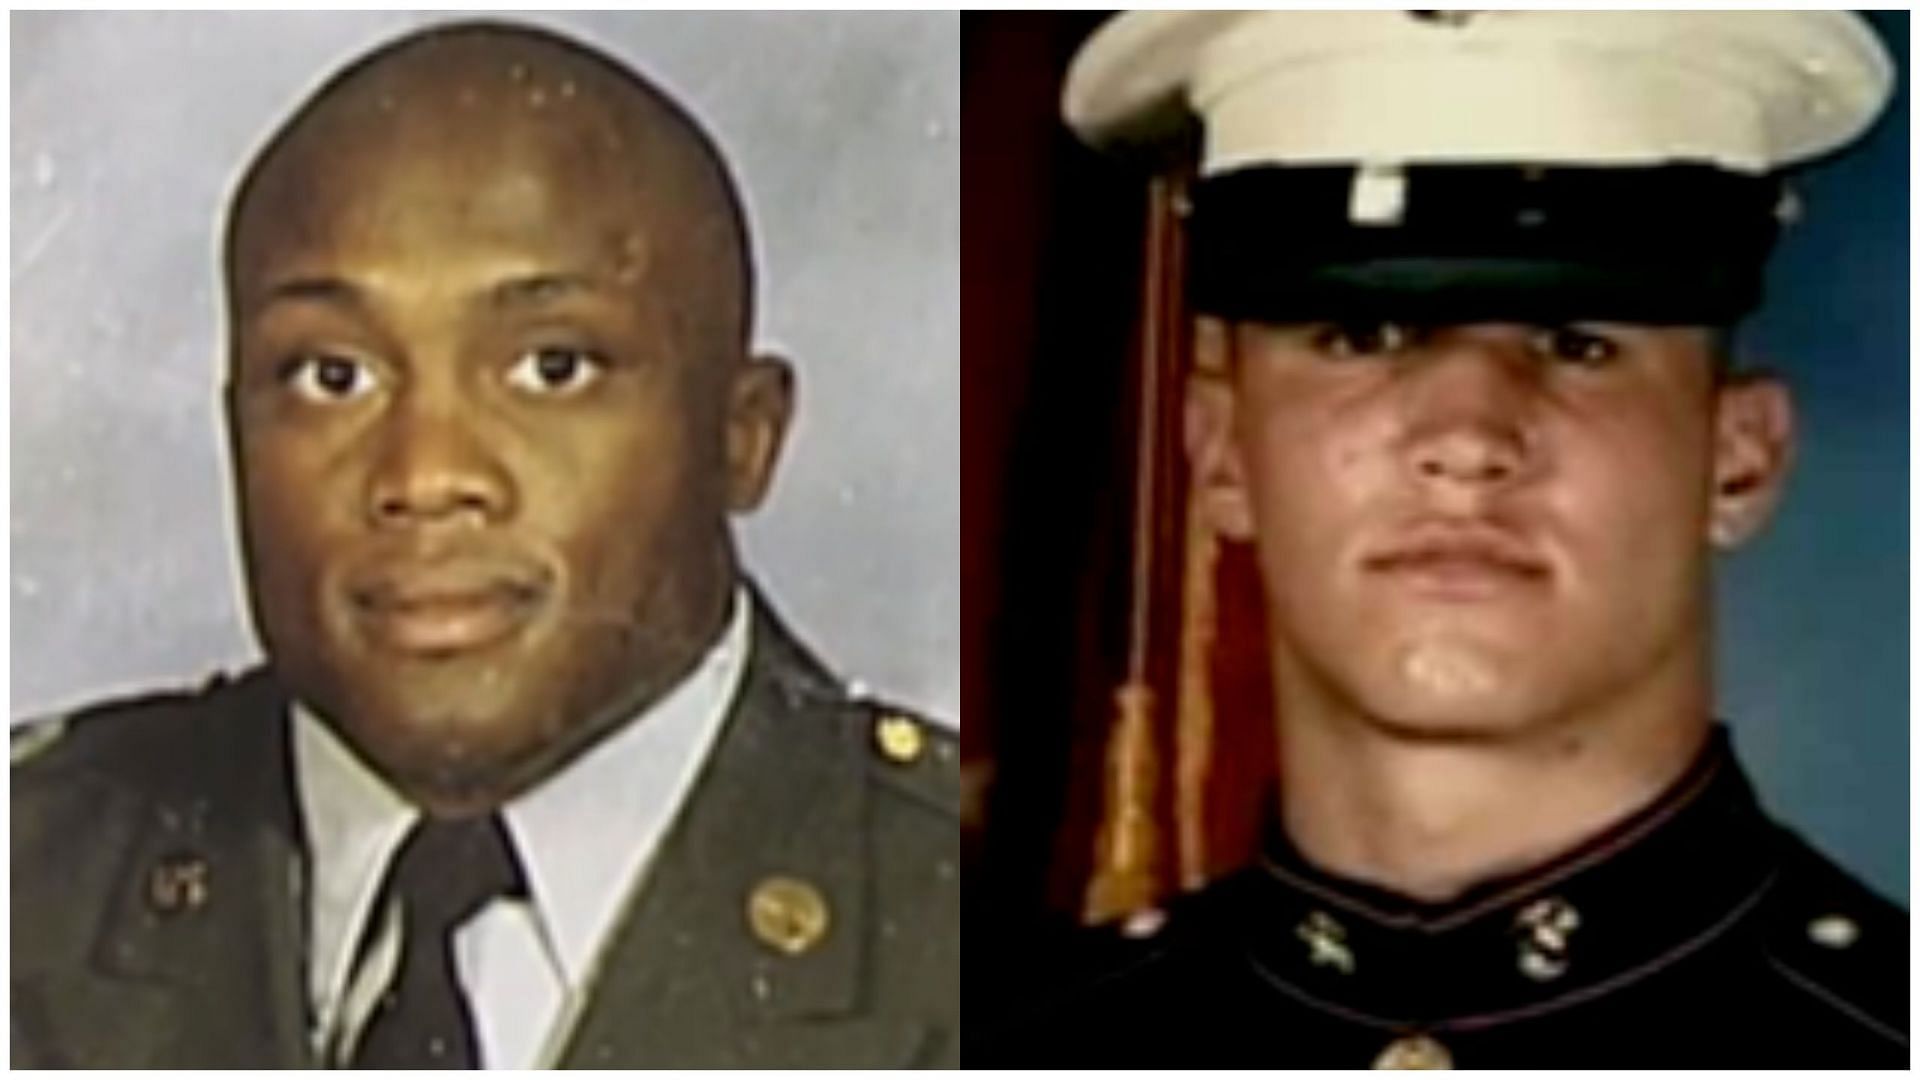 Both Bobby Lashley and Randy Orton once served in the military